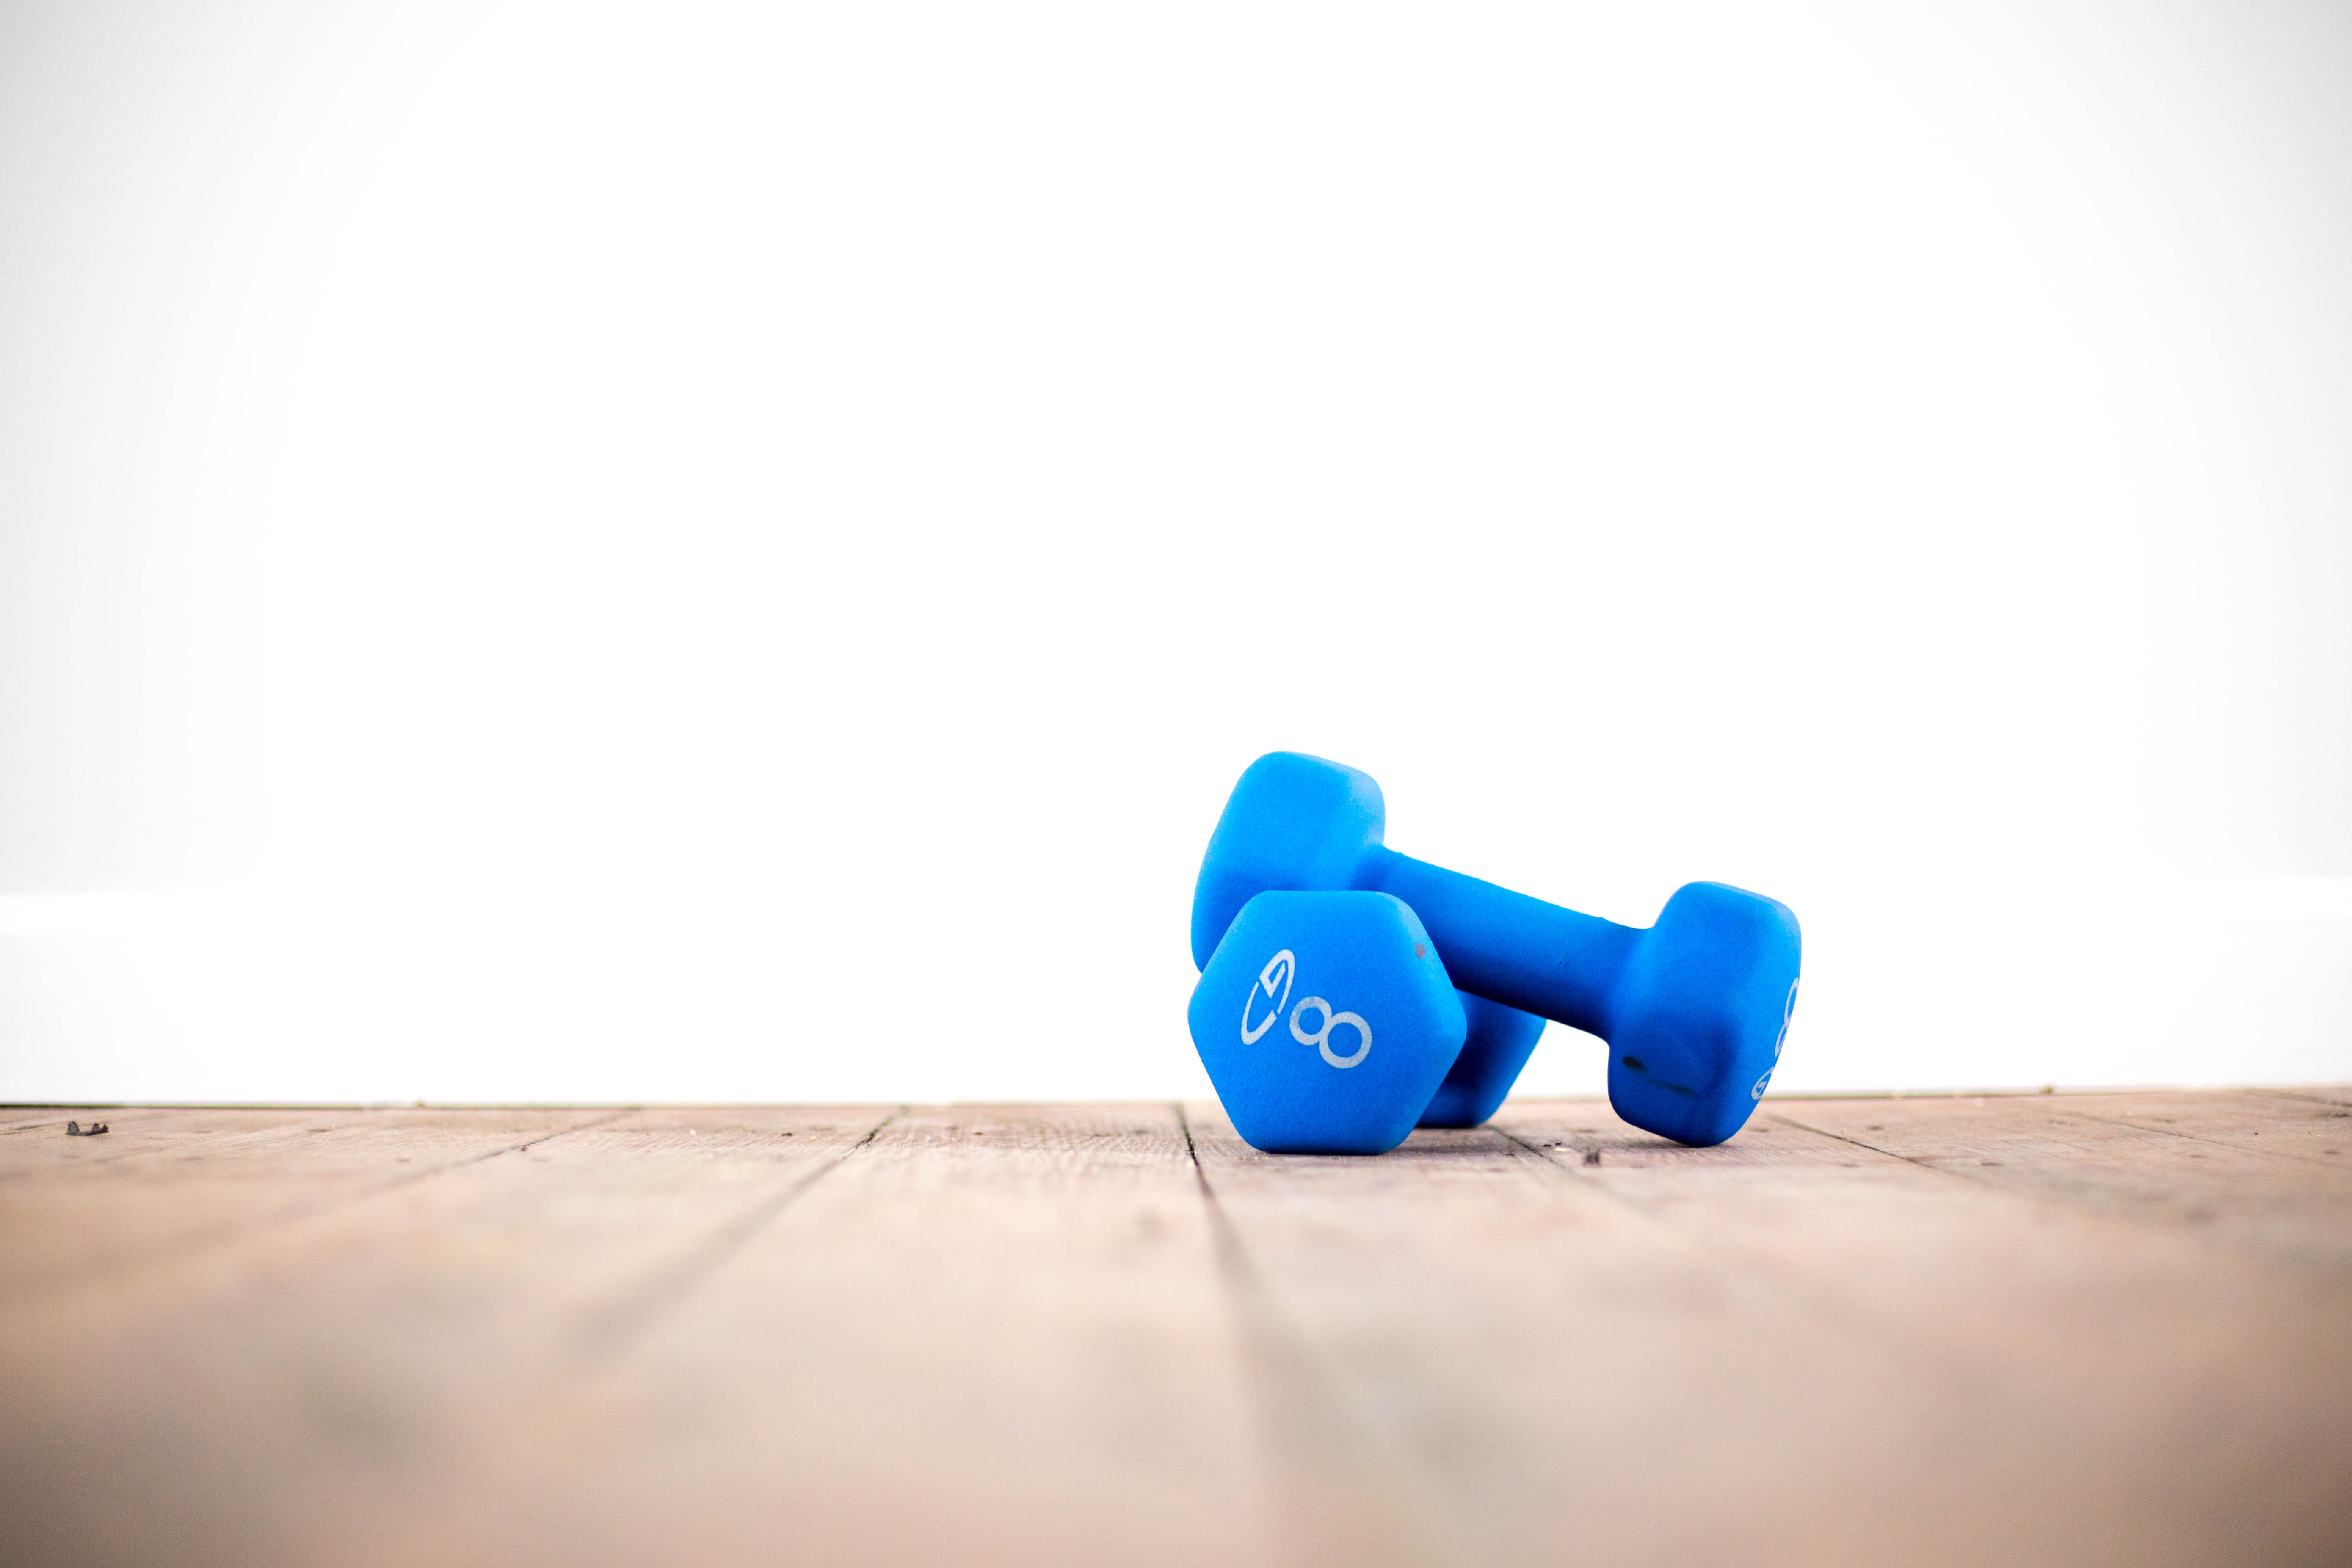 https://negativespace.co/wp-content/uploads/2019/11/negative-space-fitness-weights-trainer-blue.jpg